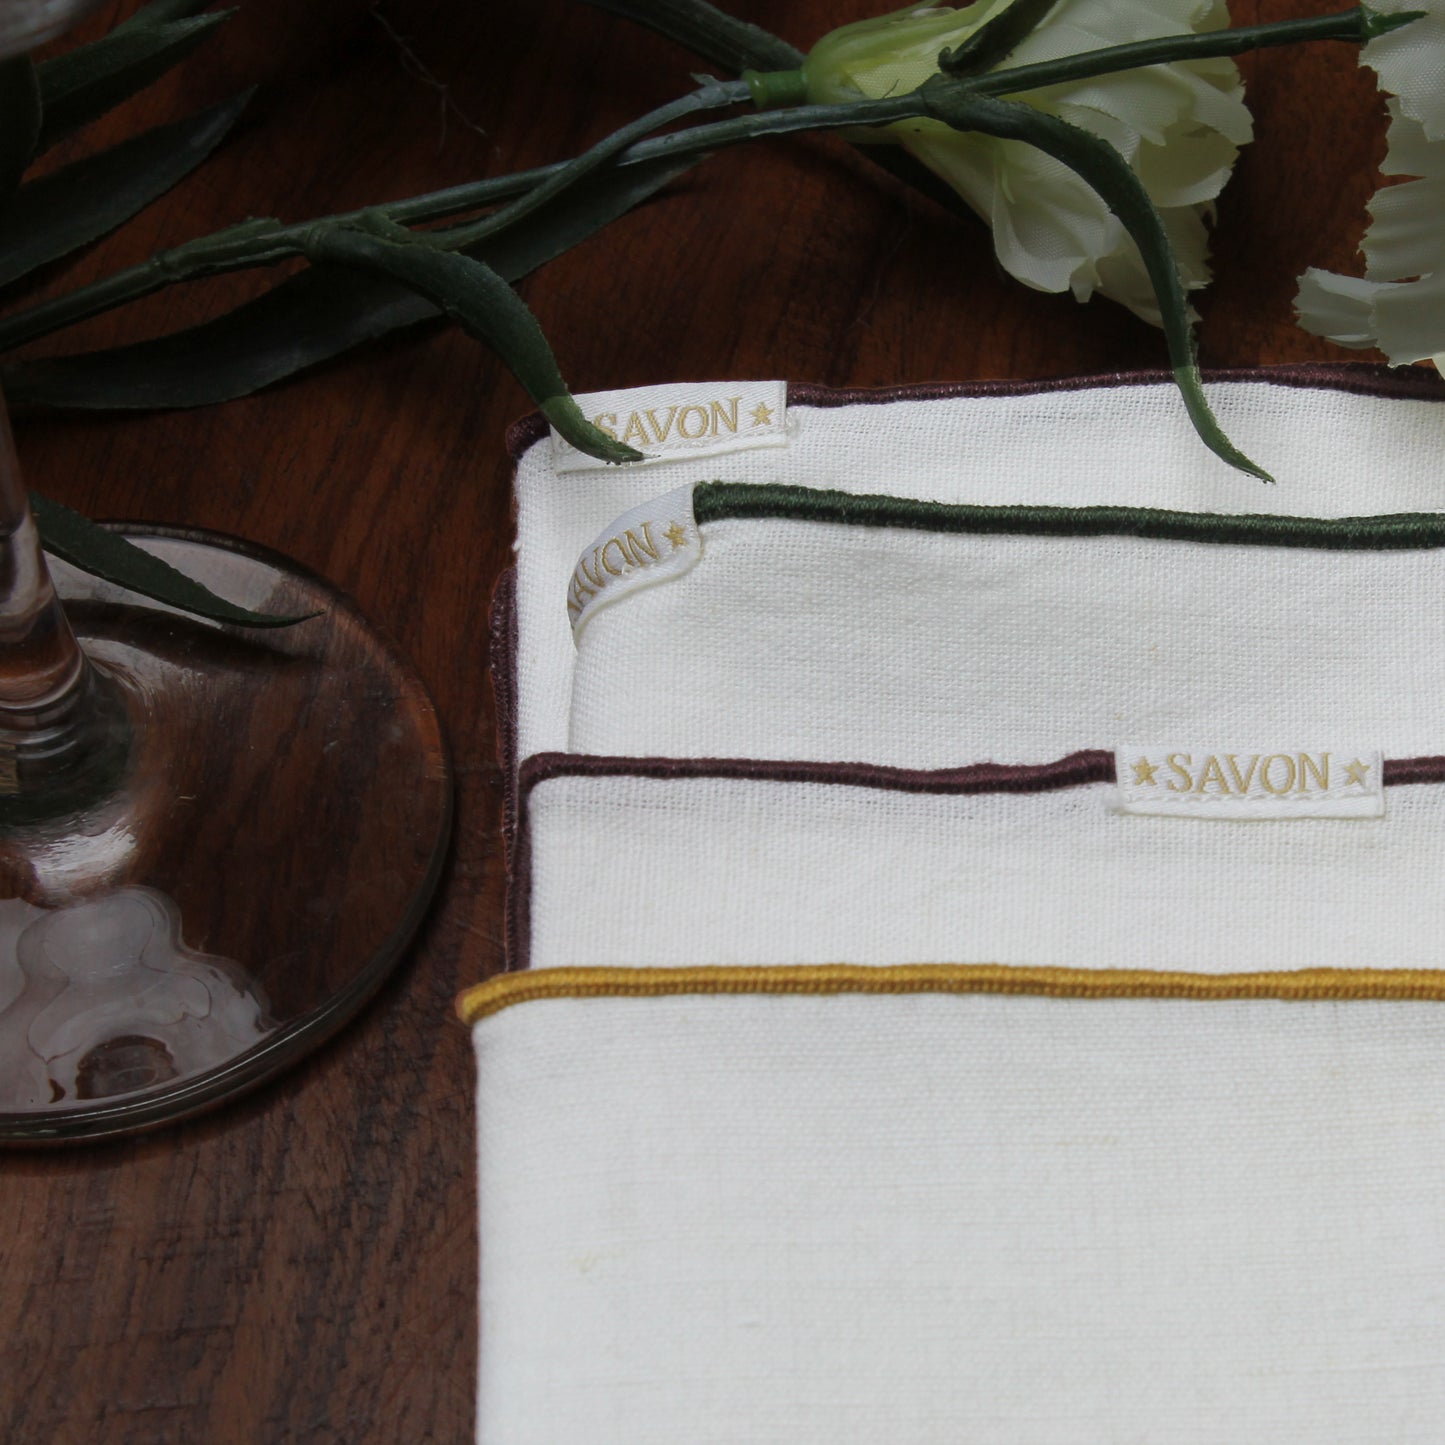 Cotton Cloth Cocktail Napkin 7x7 inch White with Colored Border Trim Set of 12 Gold Green Brown Coffee